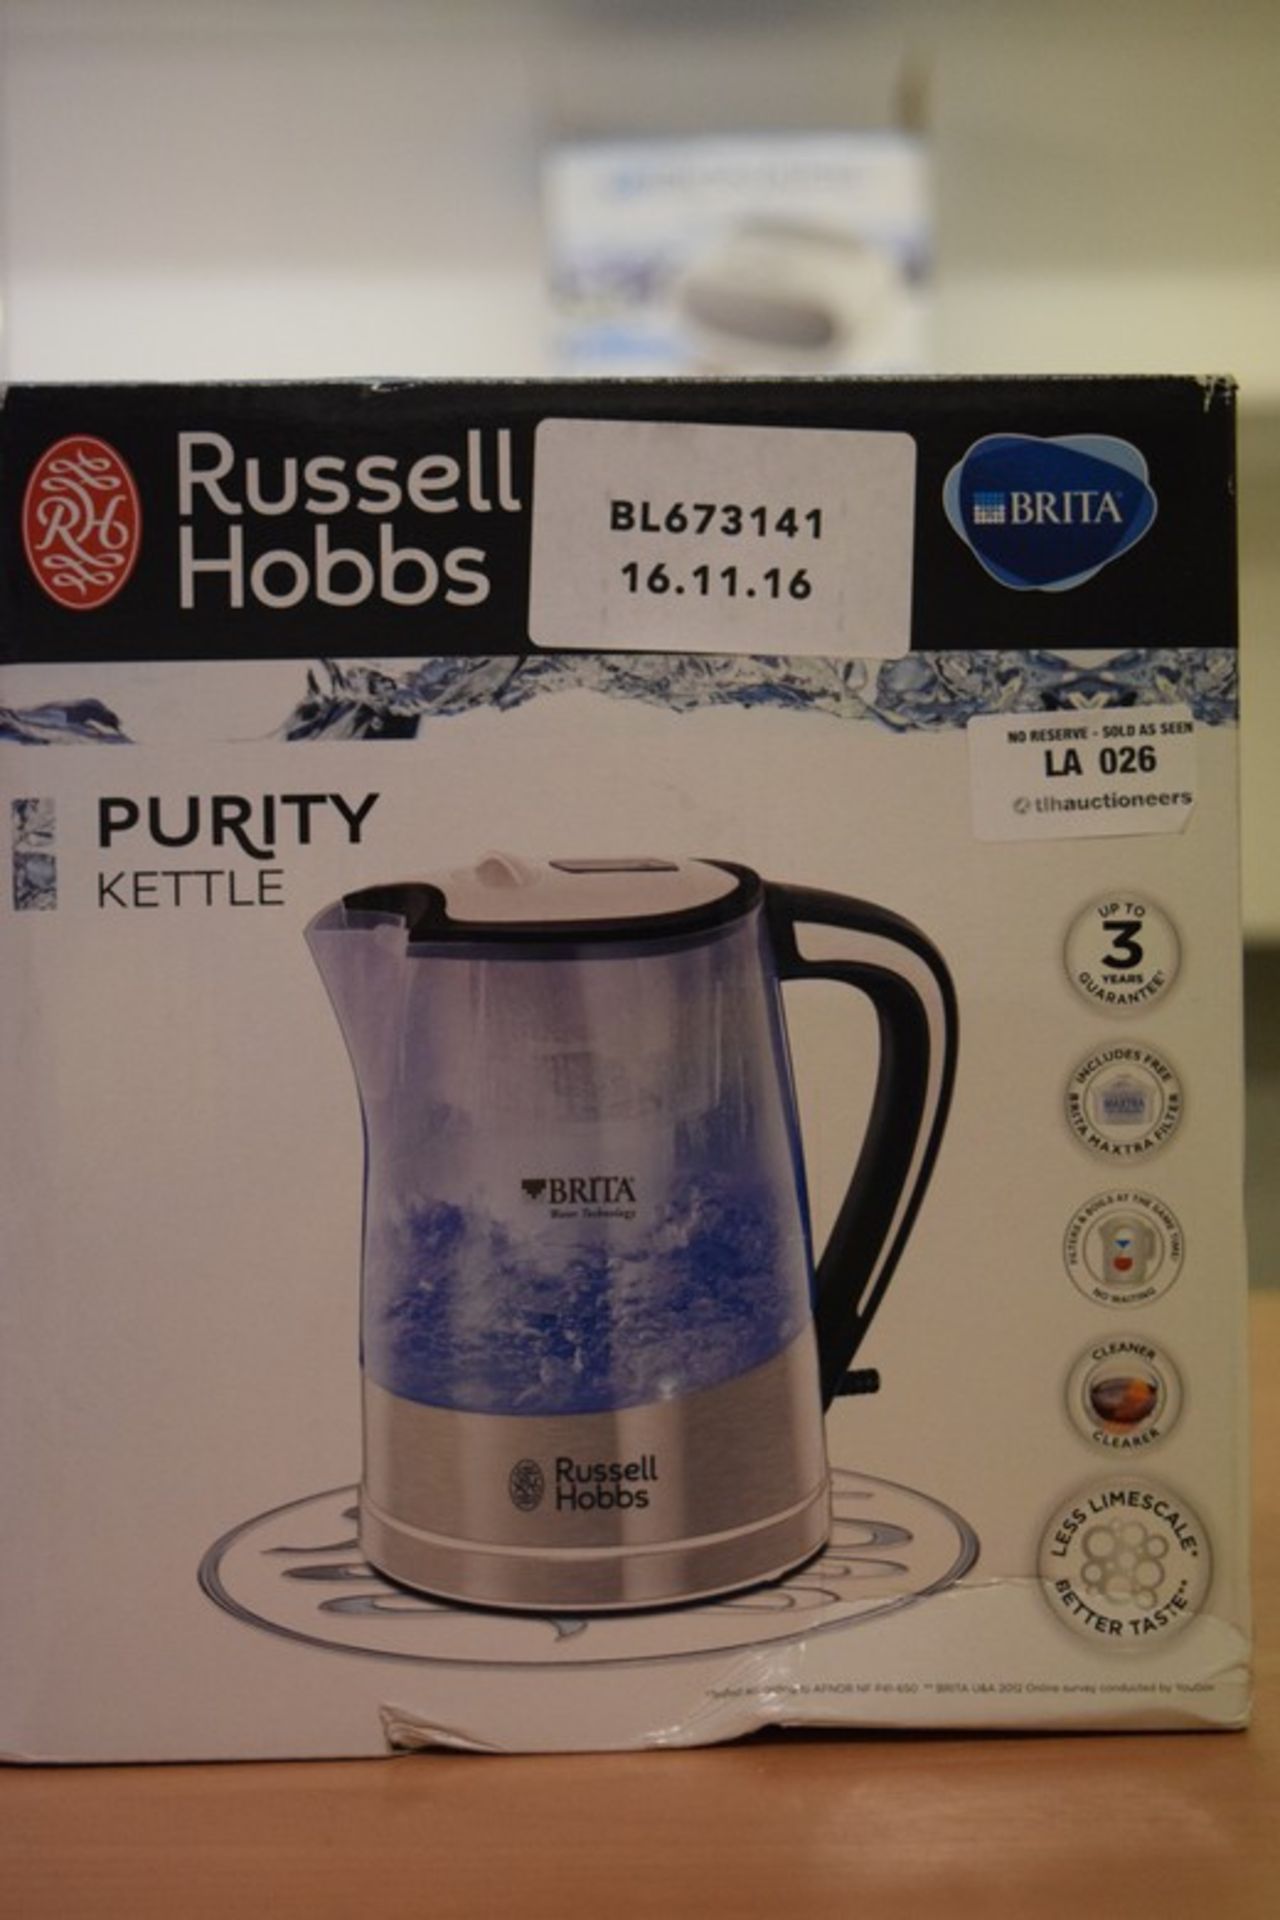 1 x BOXED RUSSELL HOBBS PUROTY KETTLE RRP £45 16/11/16 *PLEASE NOTE THAT THE BID PRICE IS MULTIPLIED